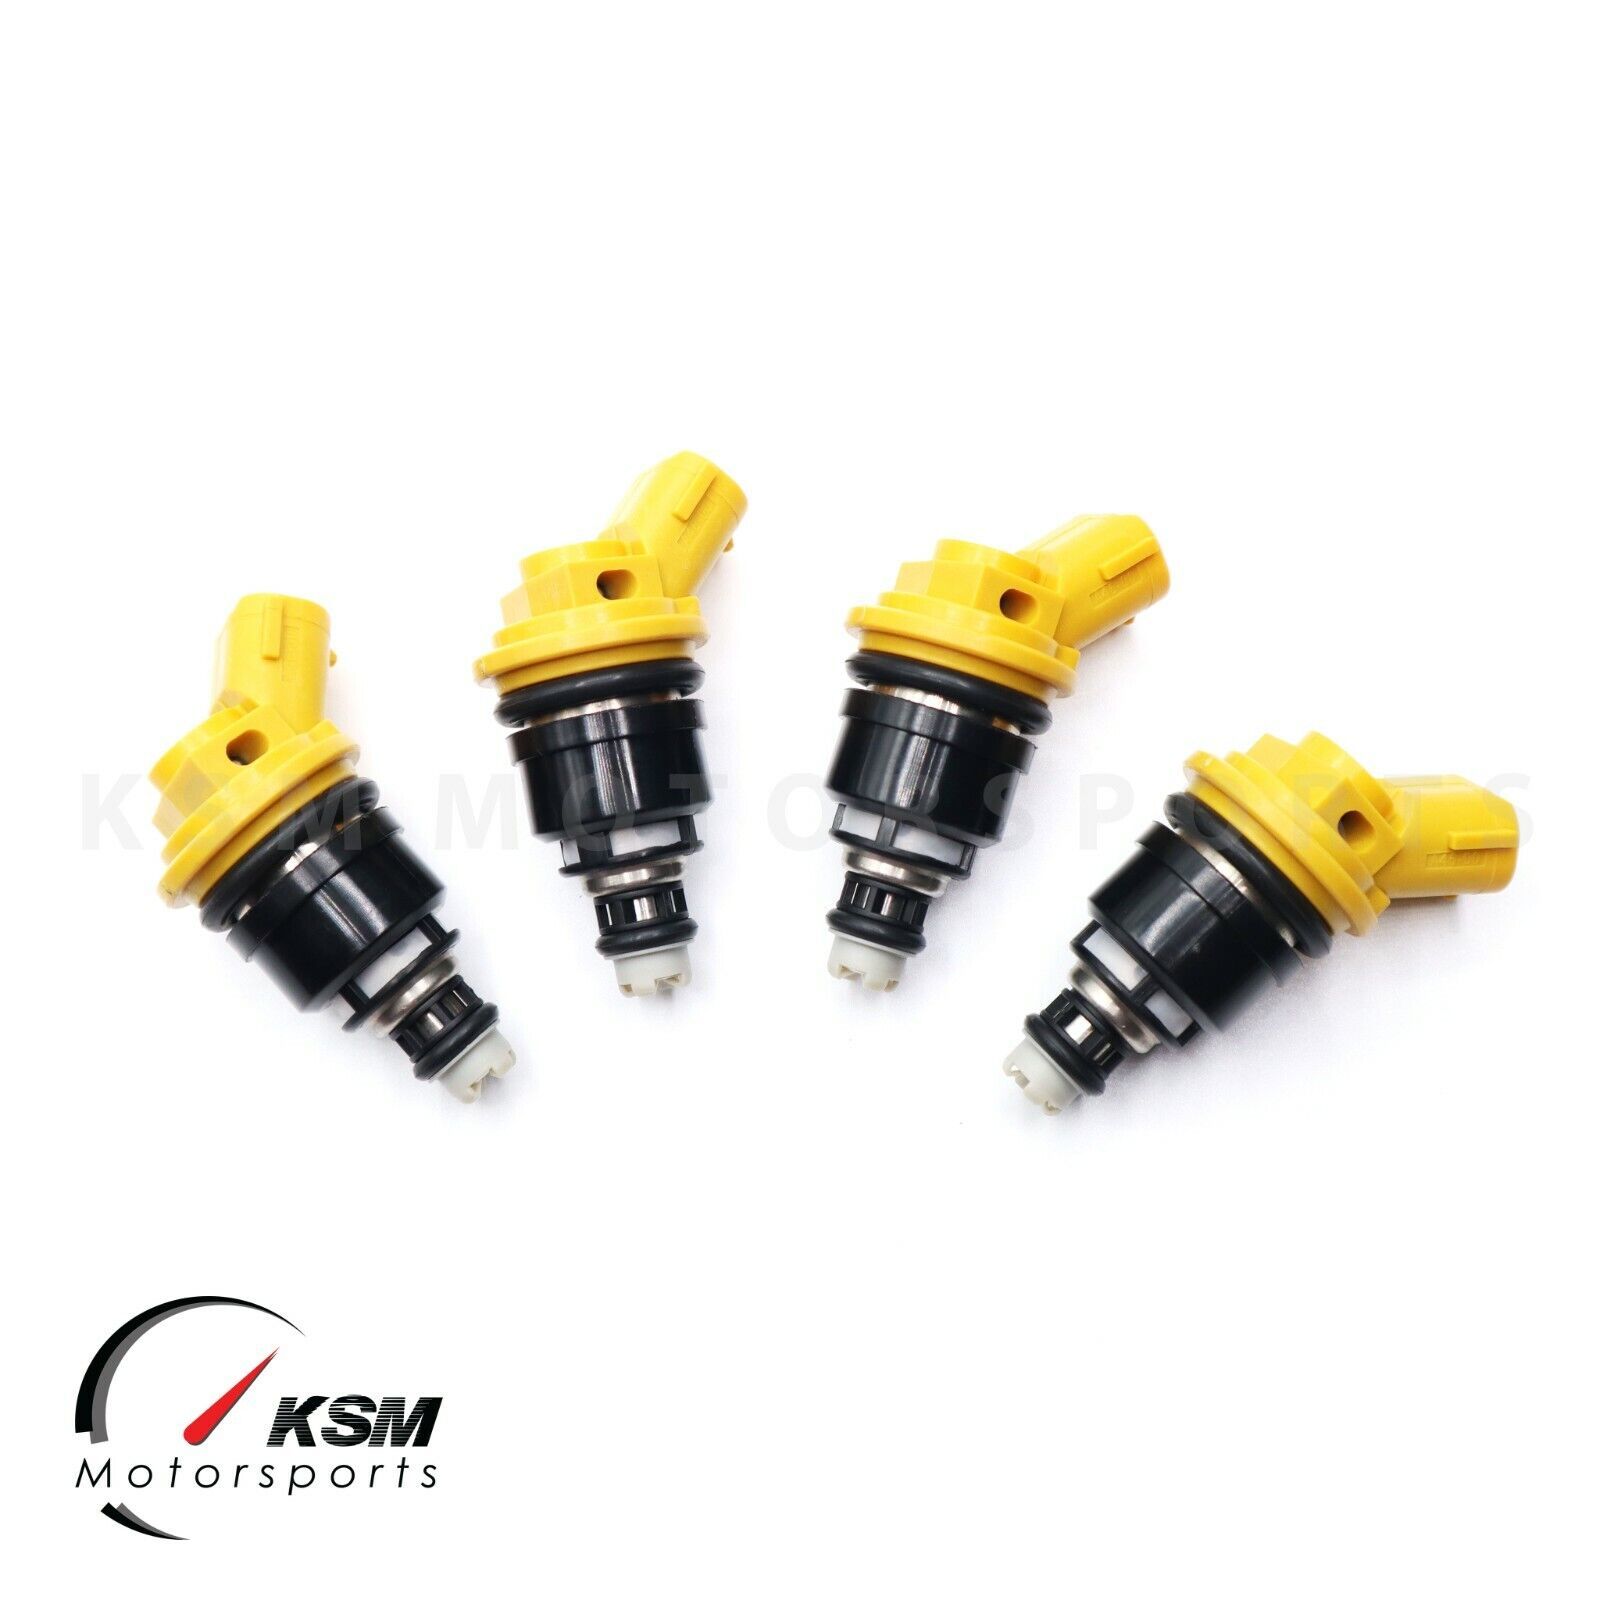 Primary image for 4 x 550cc new fuel injectors Side feed for Subaru WRX GC8 MY99 STI E85 fit jecs